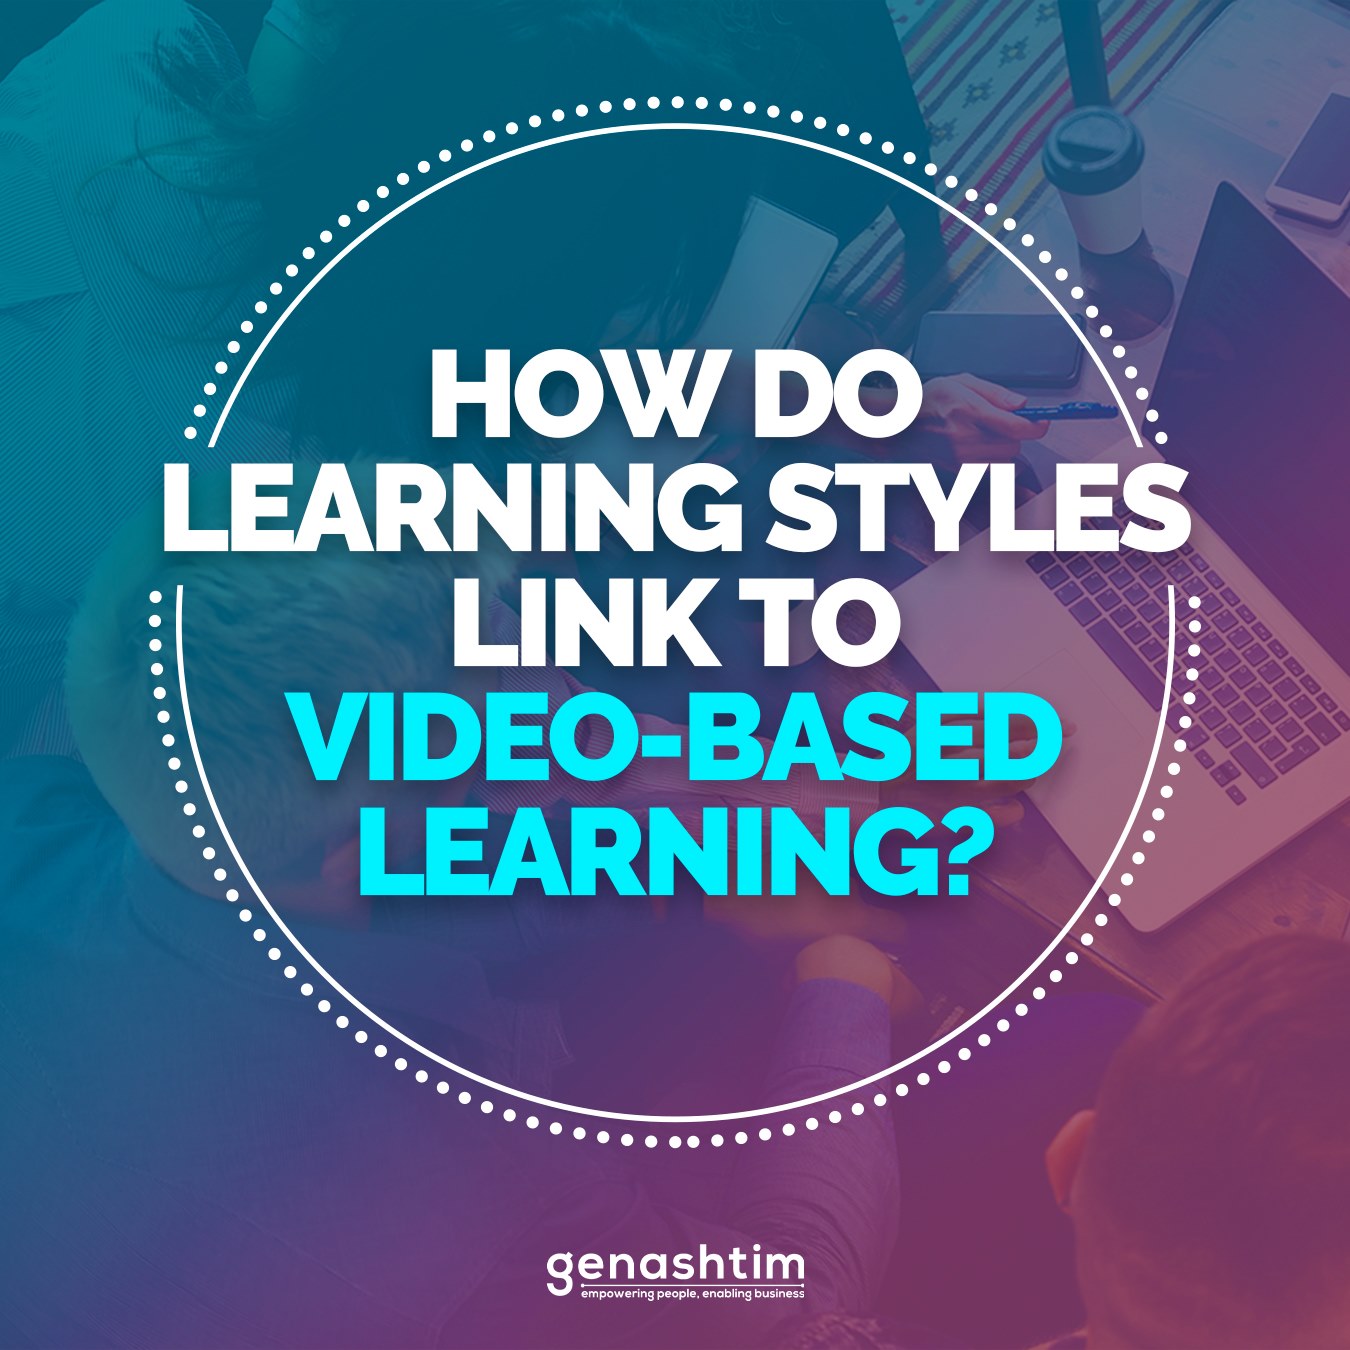 How Do Learning Styles Link To Video-Based Learning?